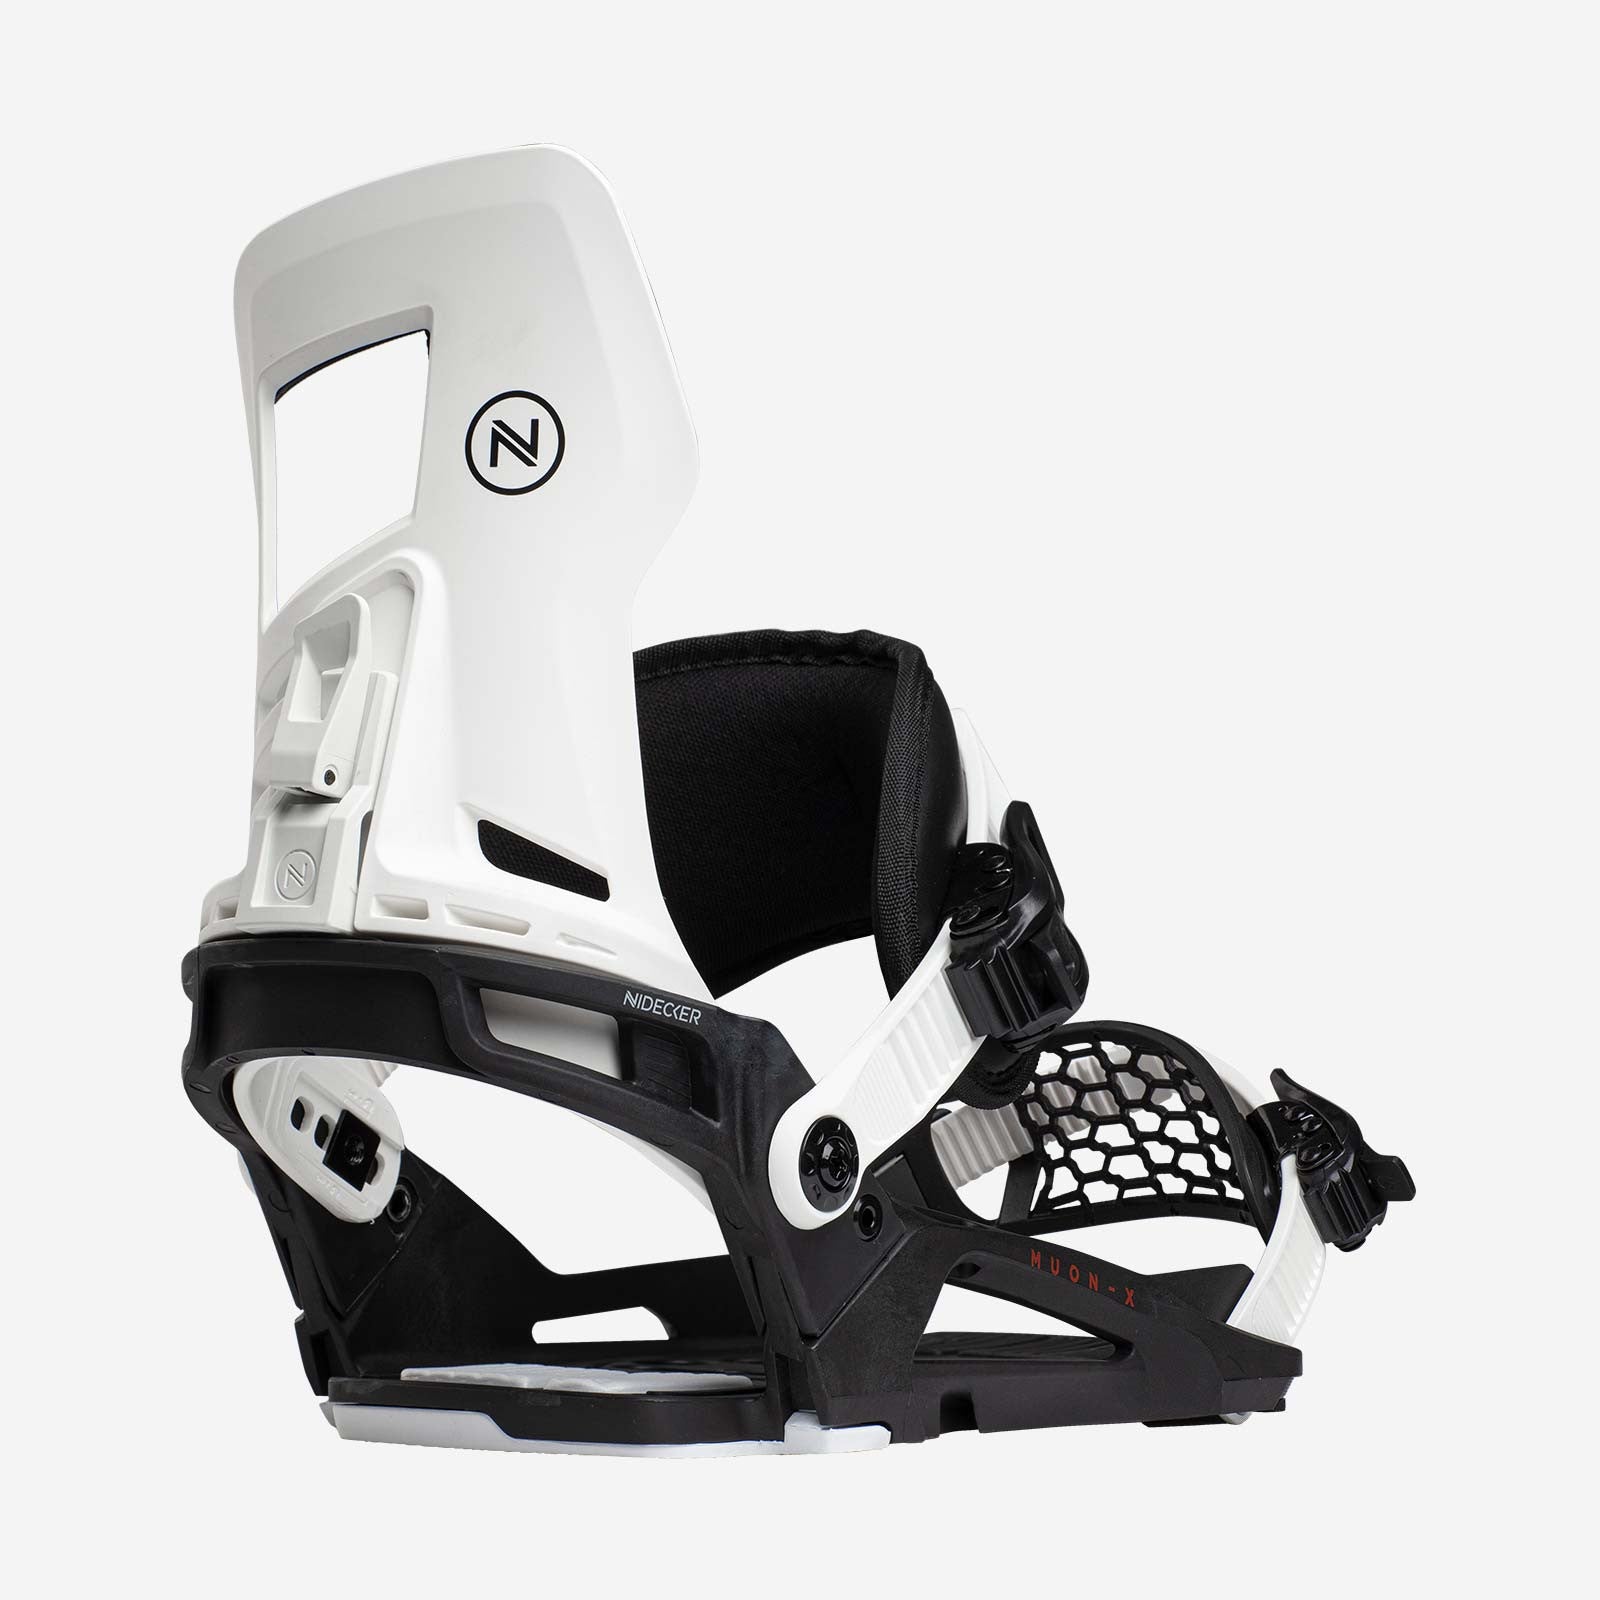 Featuring a mellow flex alongside our trademark asymmetric design, the Muon-X is a great value binding for beginner to intermediate riders looking to up their game. The glass-filled nylon baseplate and hiback have been designed for a perfect fit with any Nidecker boots.